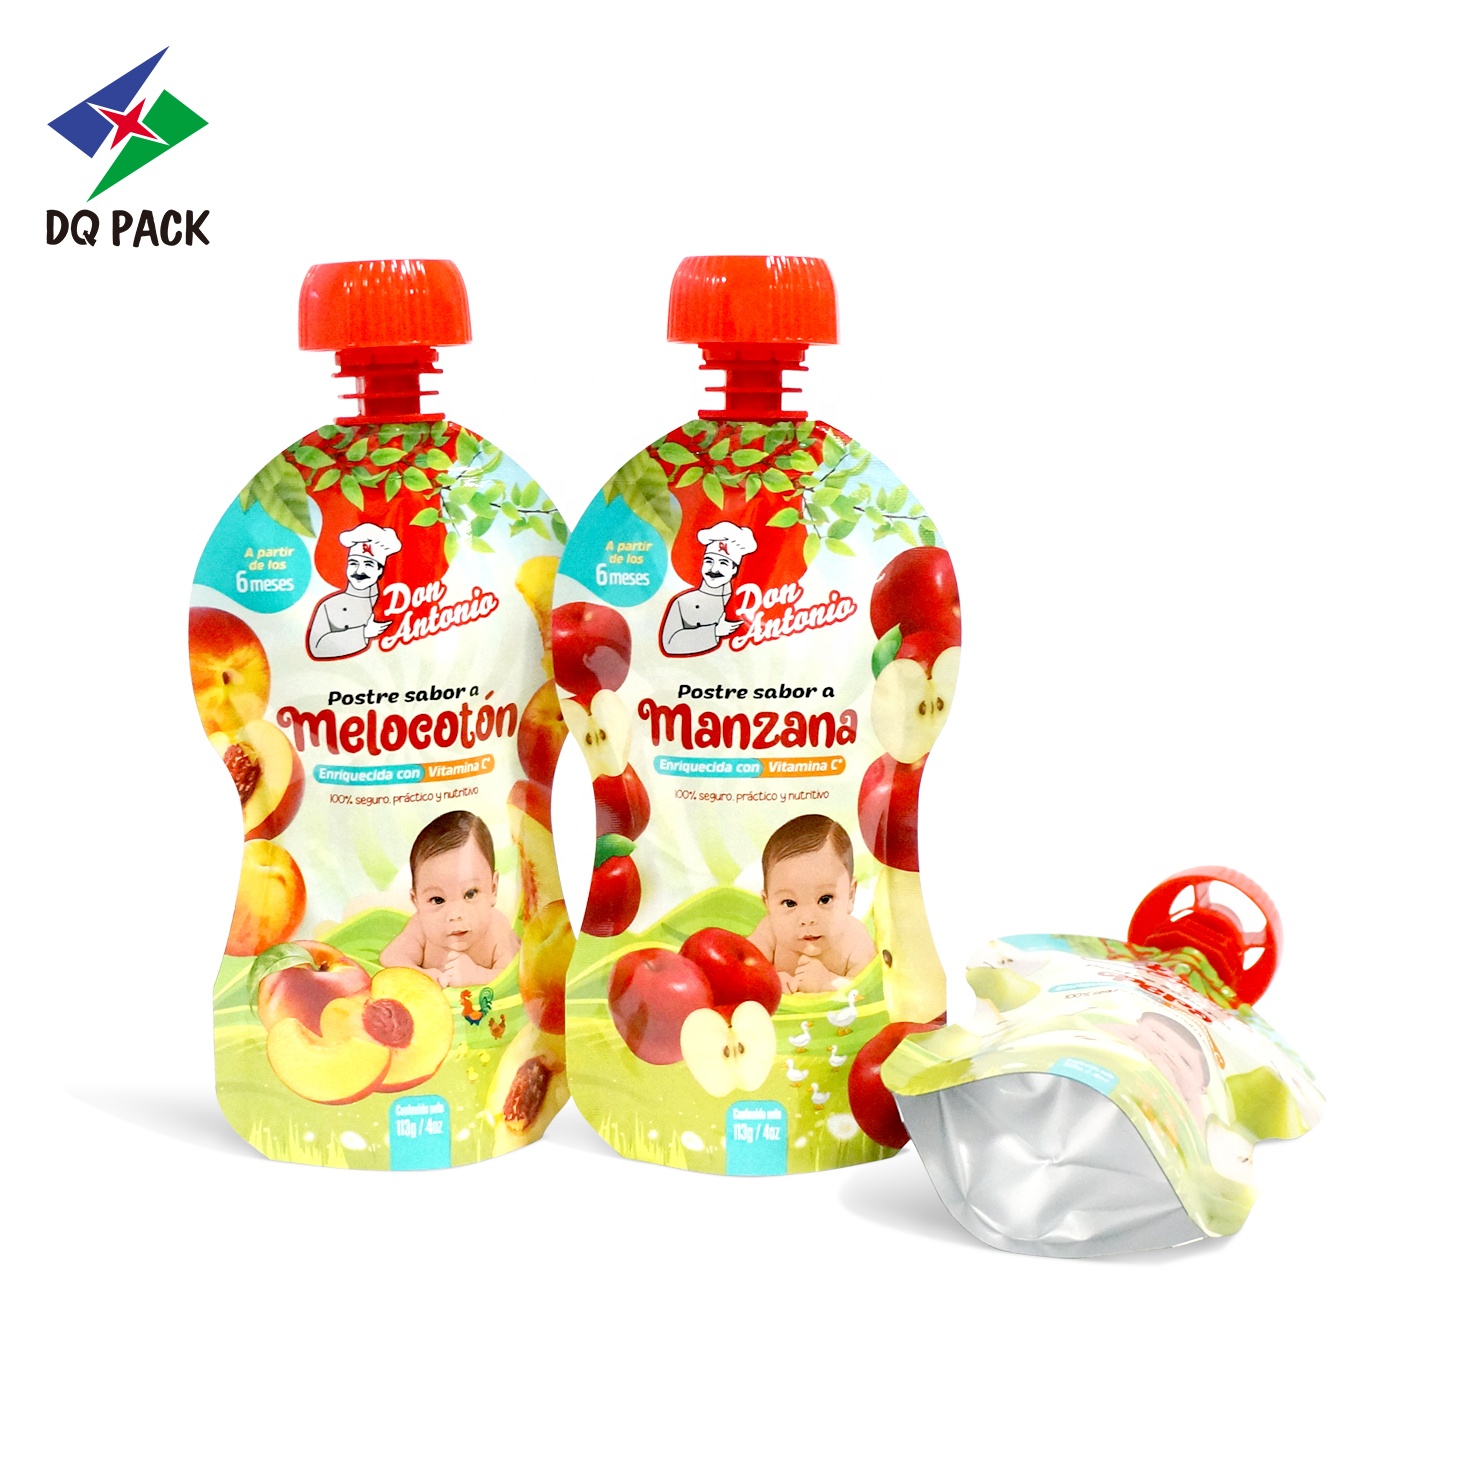 DQ PACK Jelly Bag Company China stand up baby food  energy drink  liquid spout pouch bag For milk